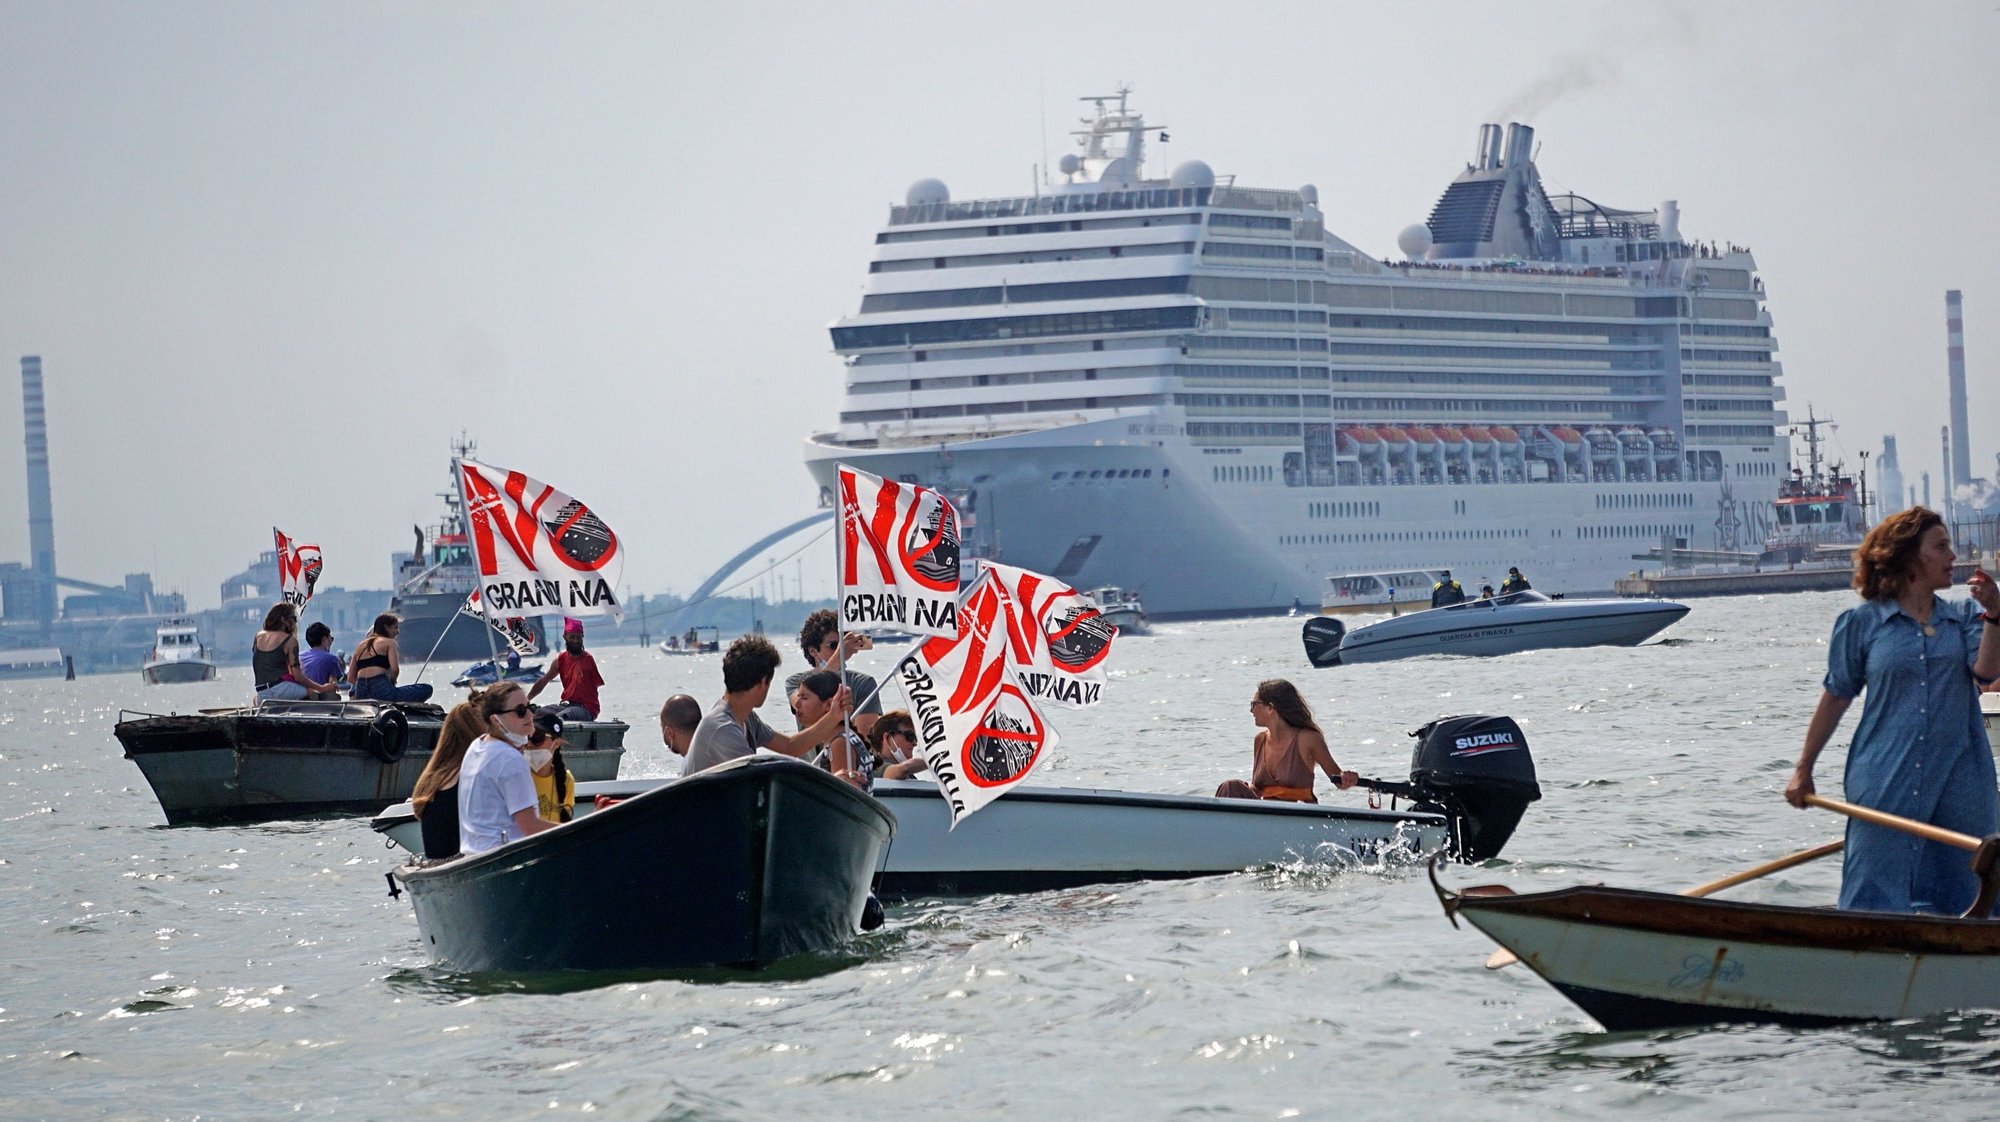 epa09249793 Activists of the committee &#039;No Grandi Navi&#039; (No big ships), headed for the MSC Orchestra on board of small boats and waving flags, protest against the cruise ship being allowed in the Lagoon, during the navigation of the ocean-going liner in the Channel of the Giudecca, Venice, Italy, 05 June 2021.  EPA/Andrea Merola